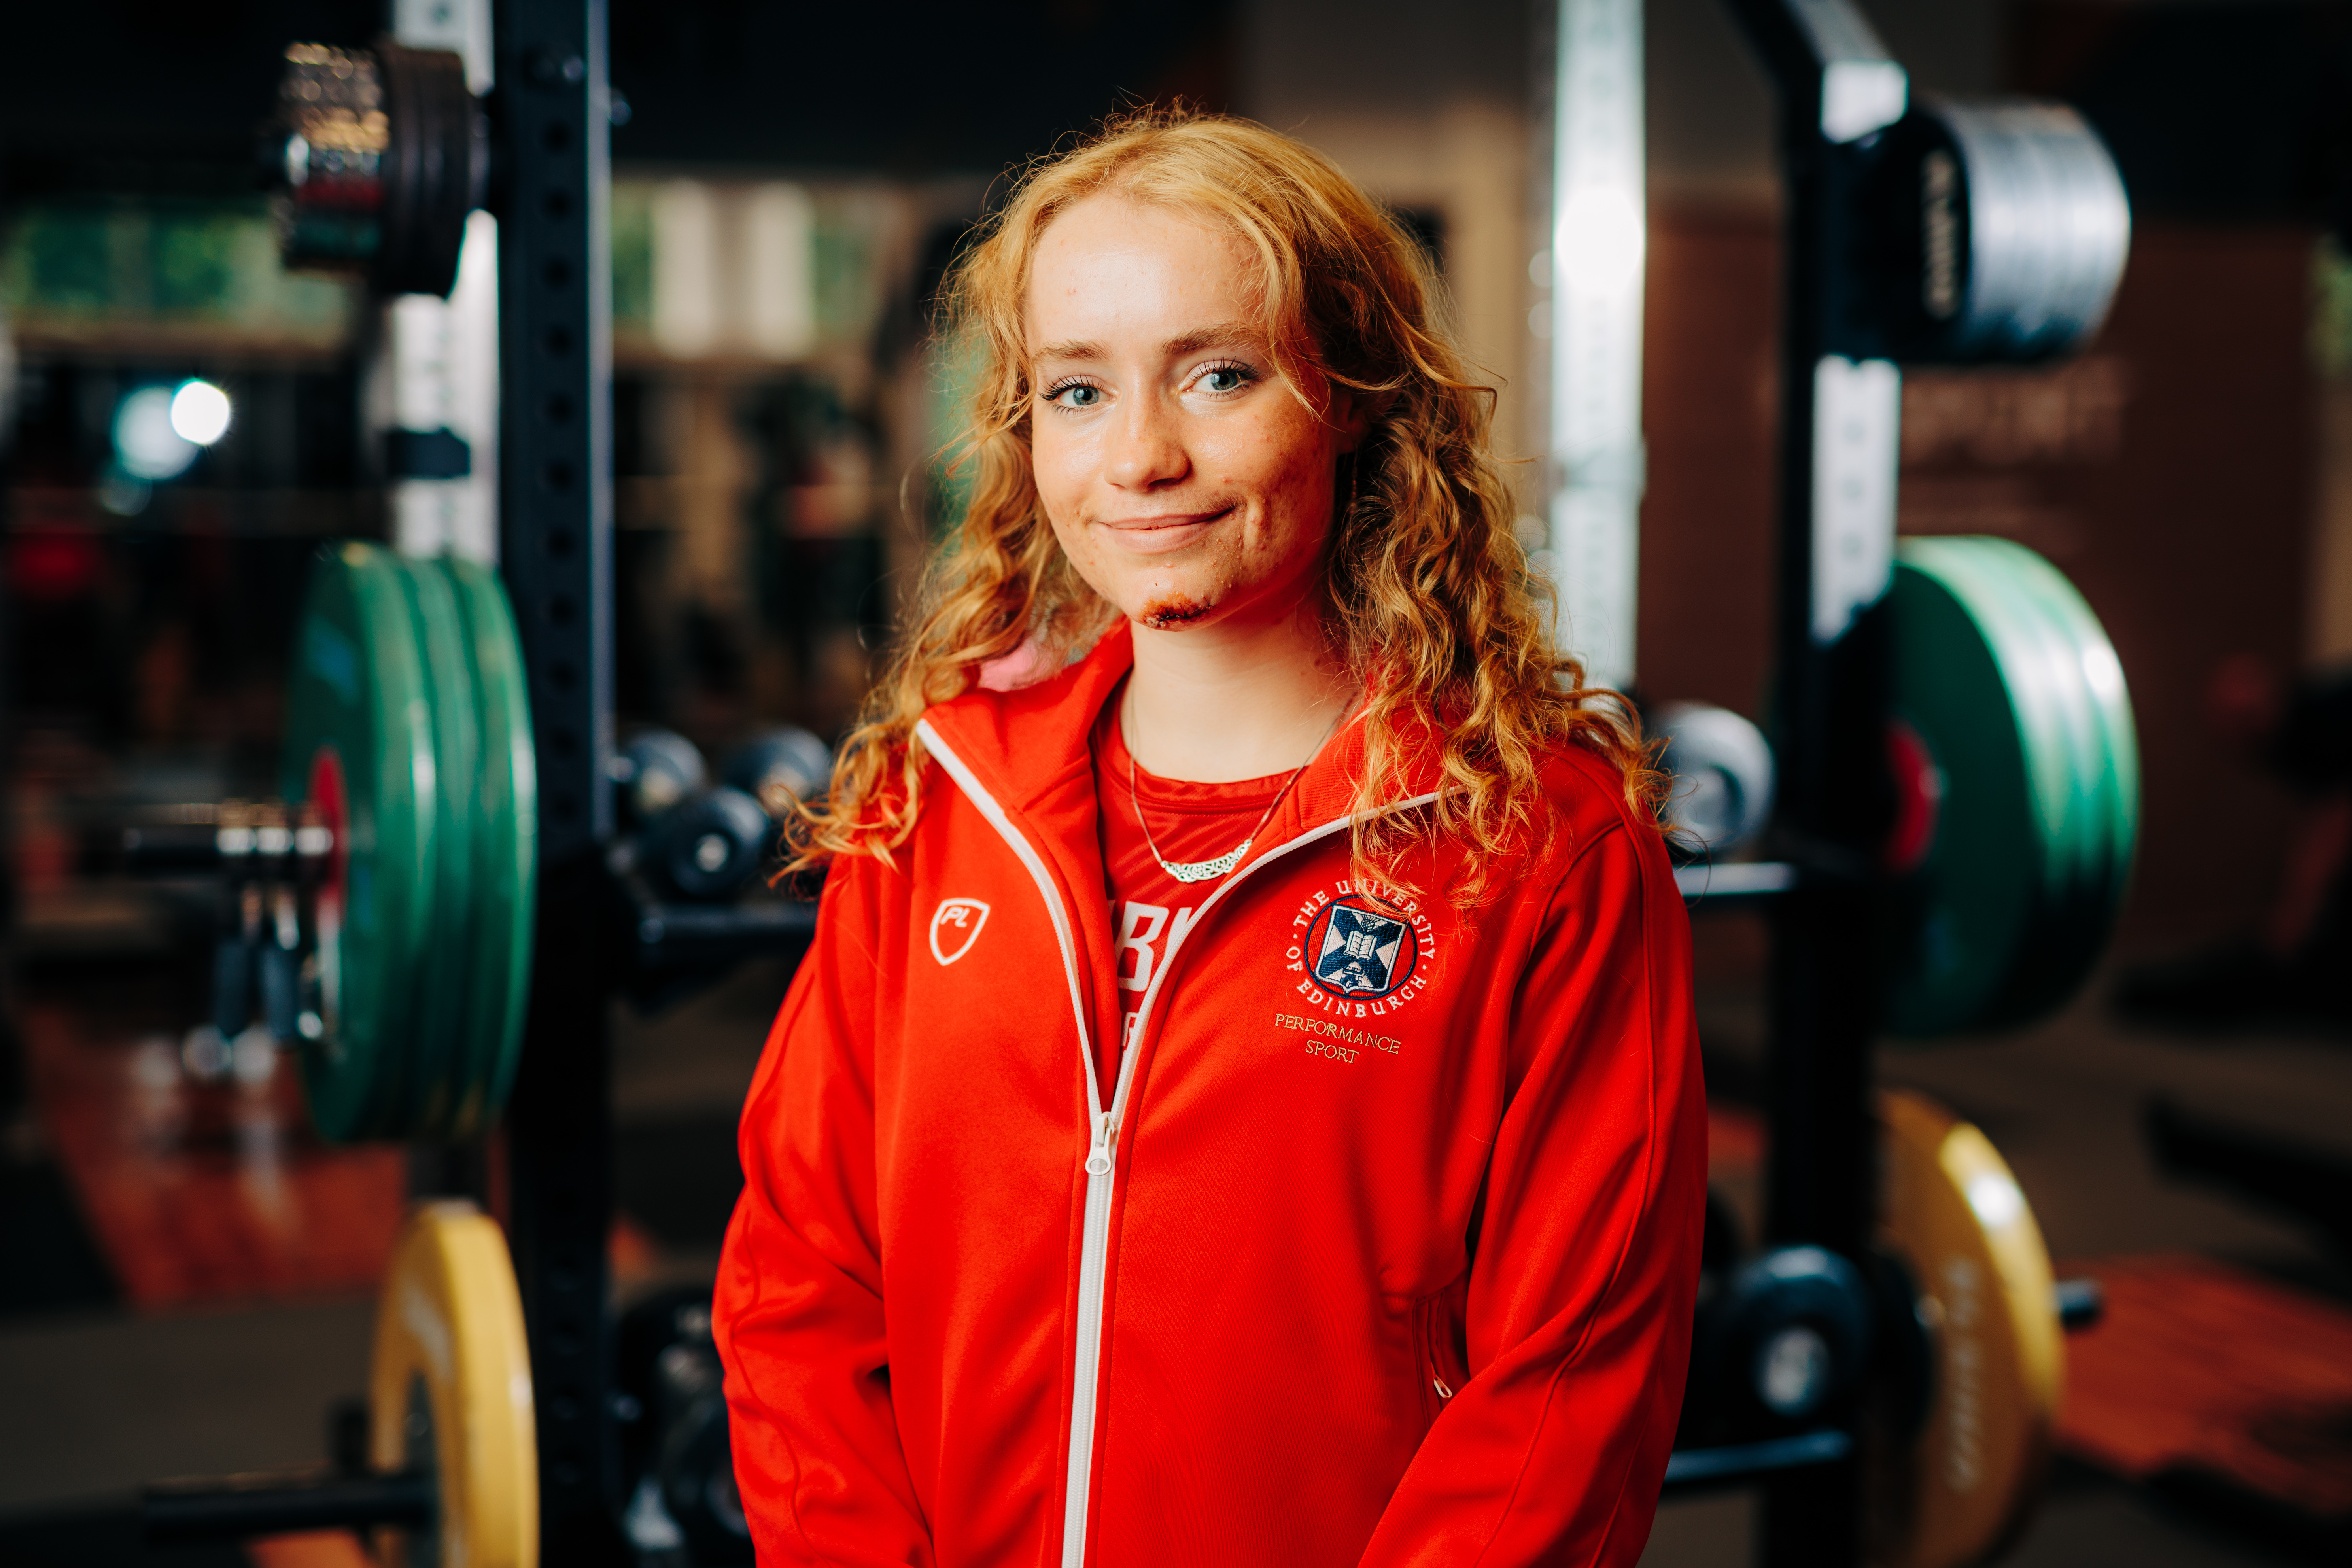 Image of sport scholar Alyson Bell smiling with gym in background